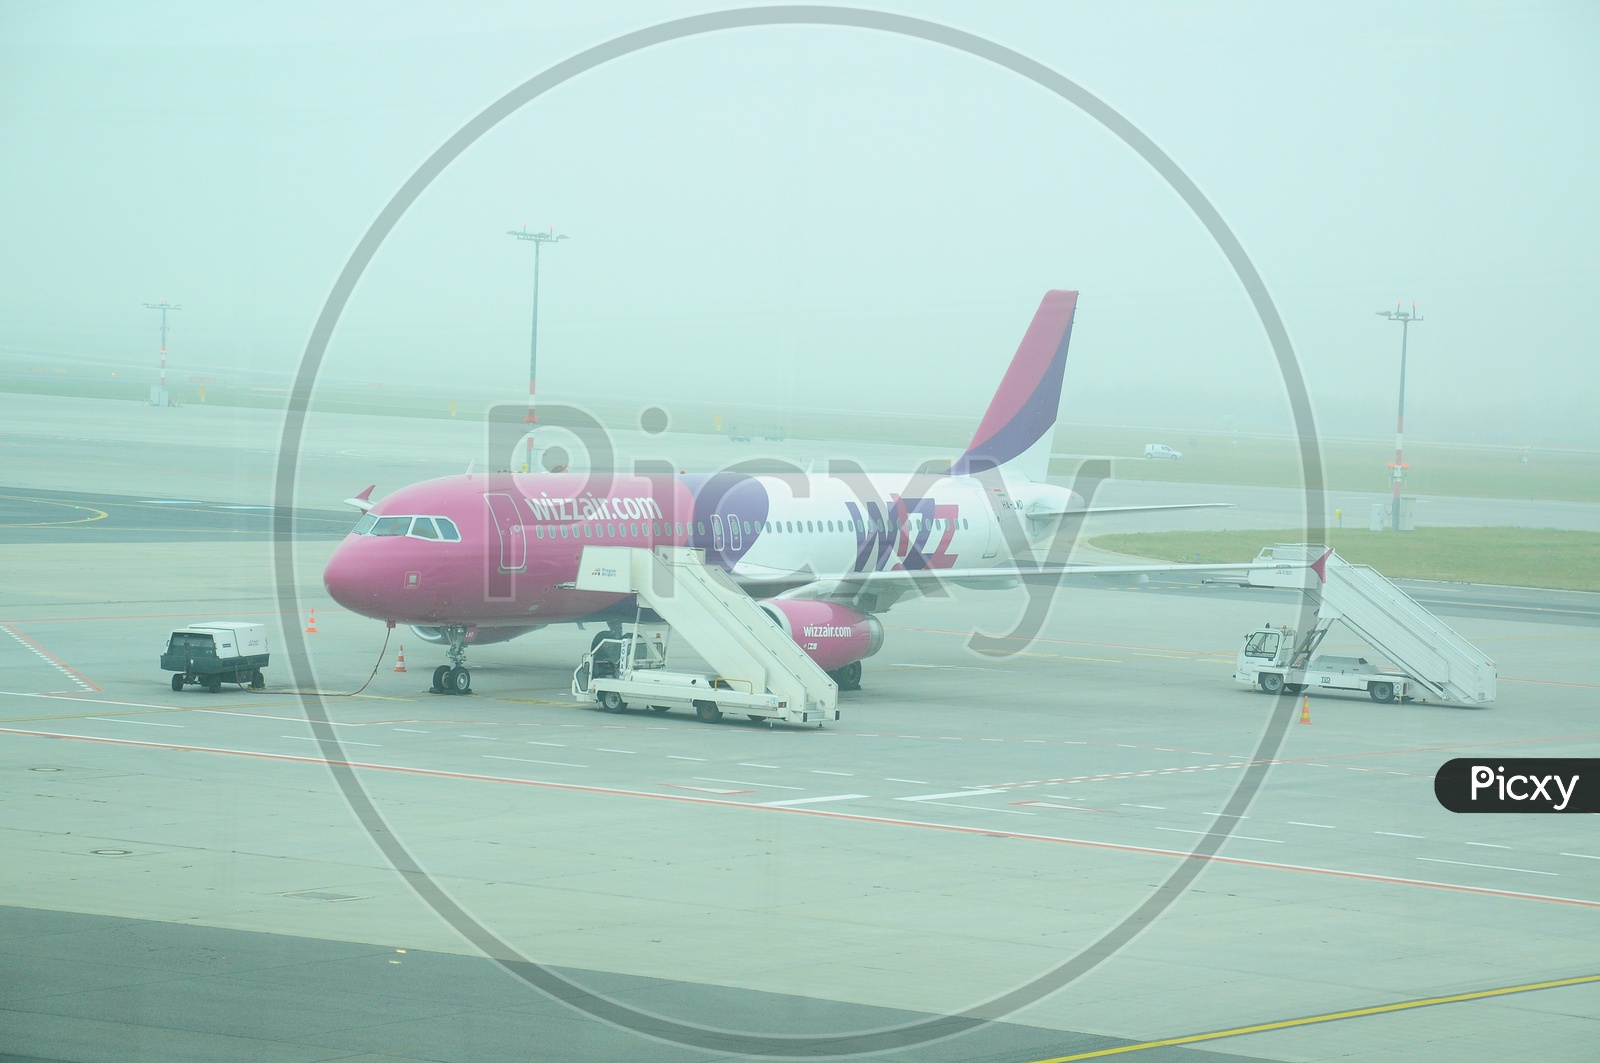 Wizz air flight waiting in Airport